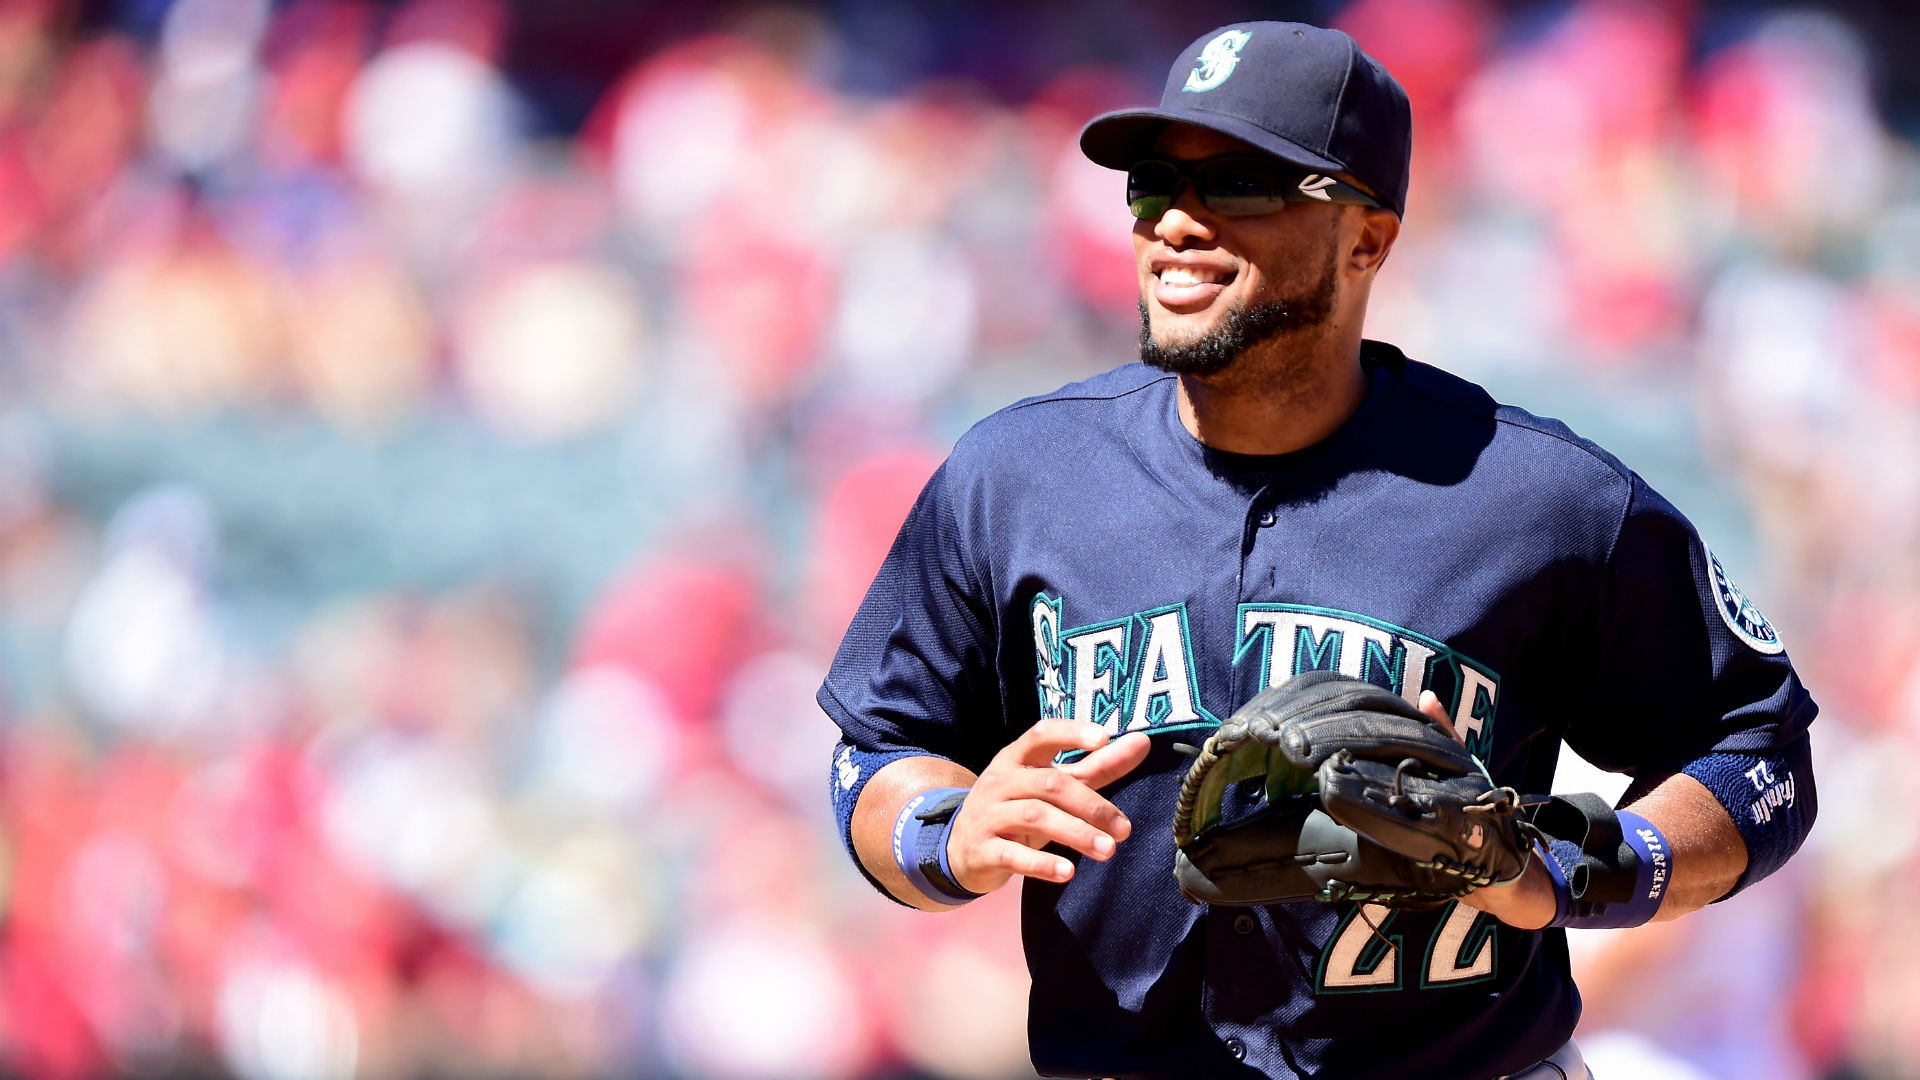 Robinson Cano Says Andy Van Slyke Told Him Not To Give Hitting